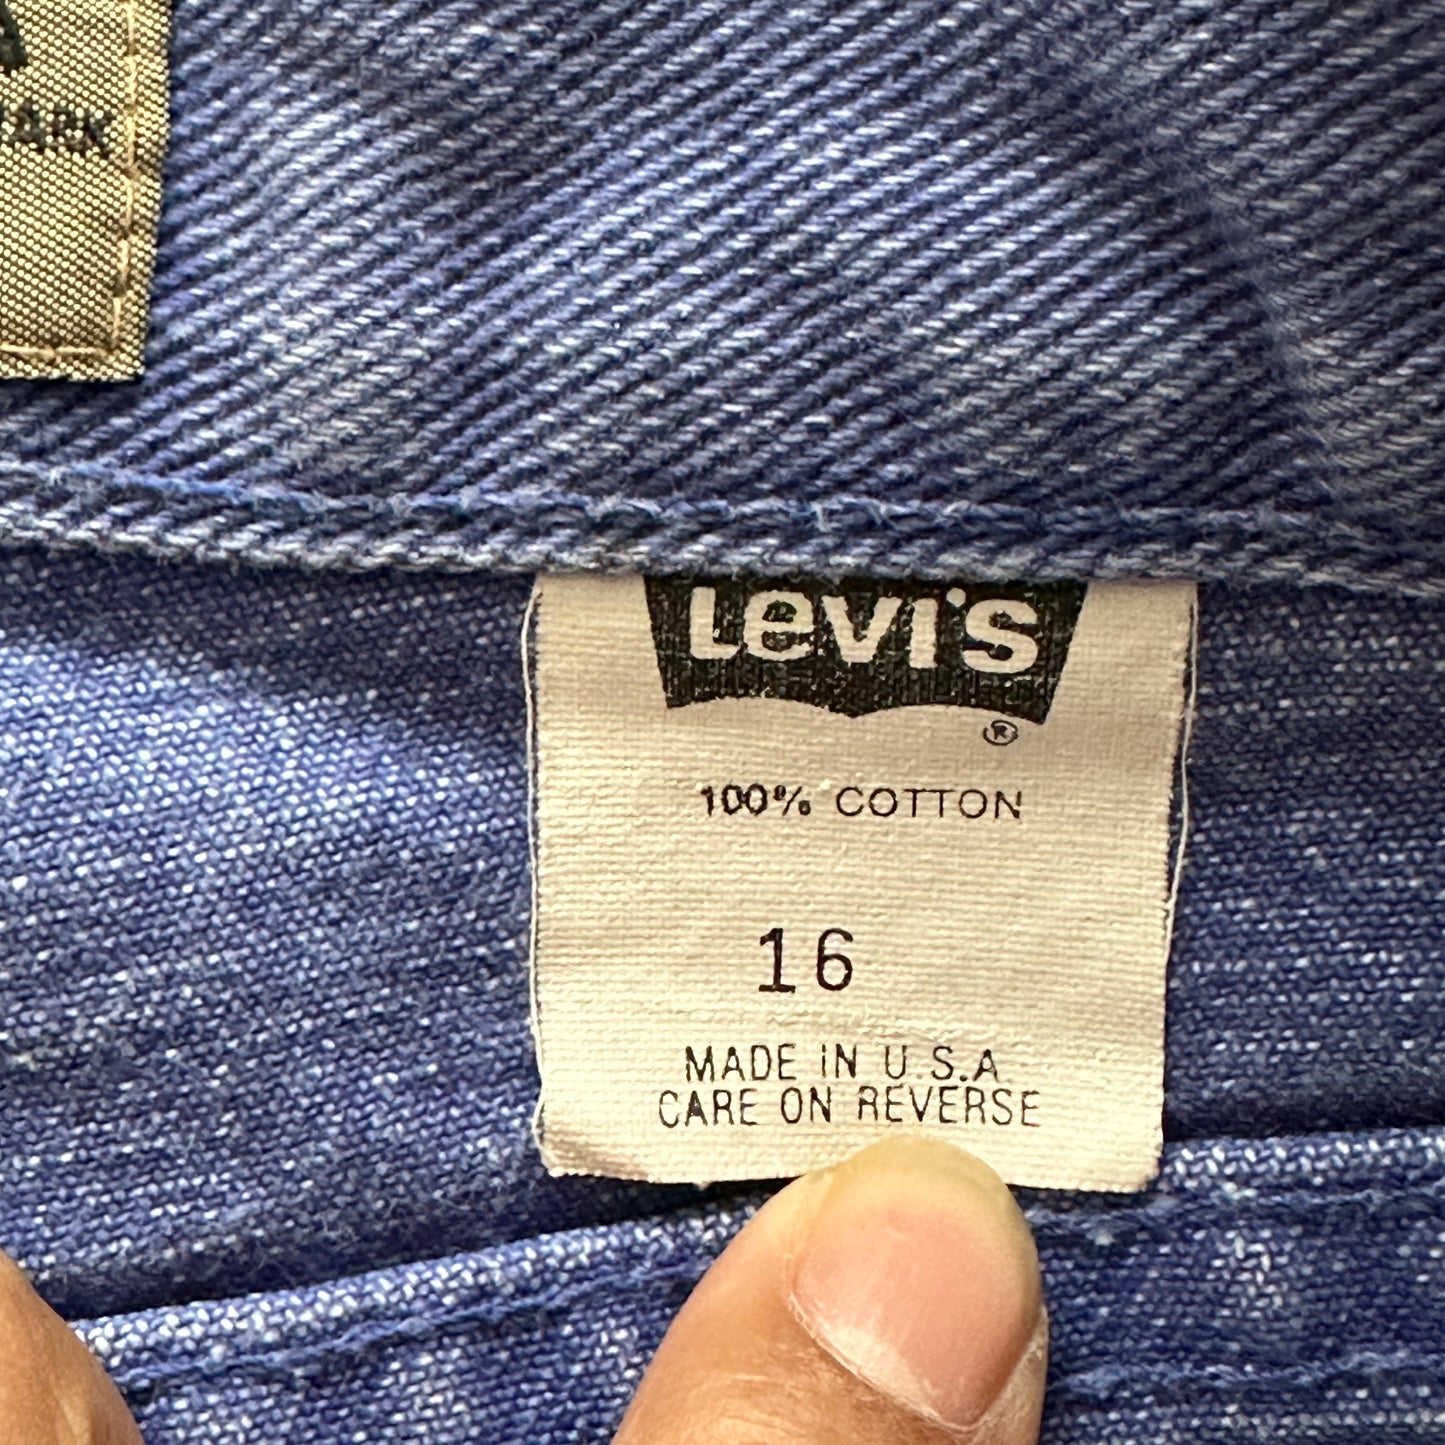 Levi's 900 series Made in USA blue purple Jeans Shorts